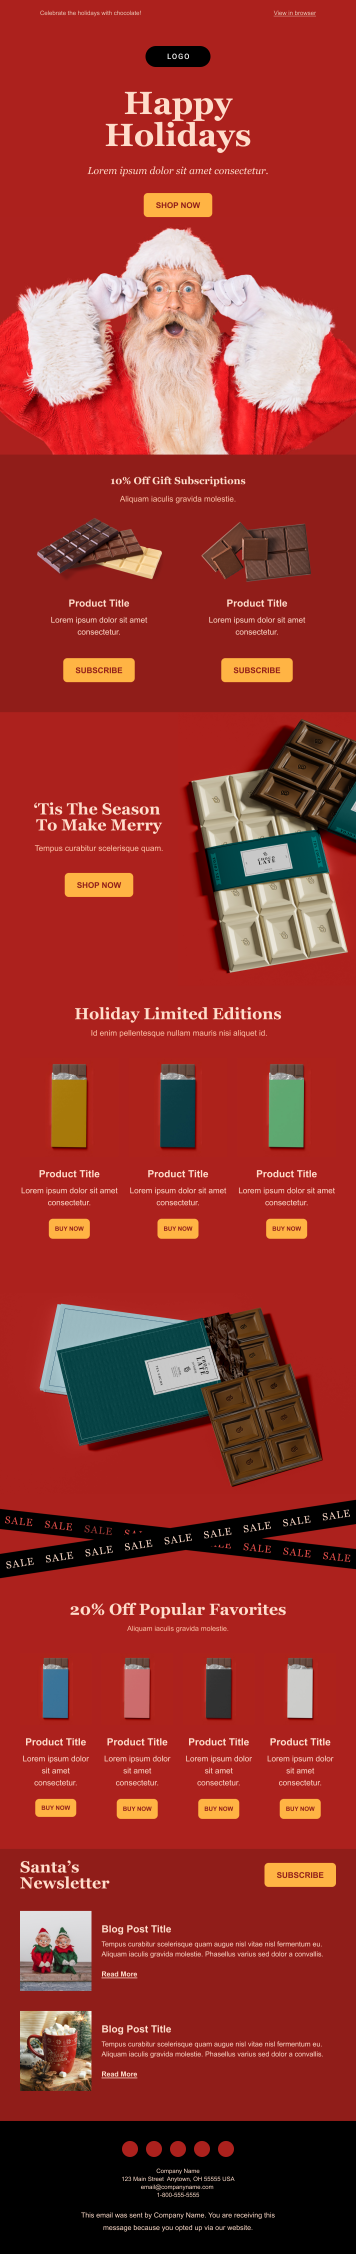 Christmas themed holiday email template